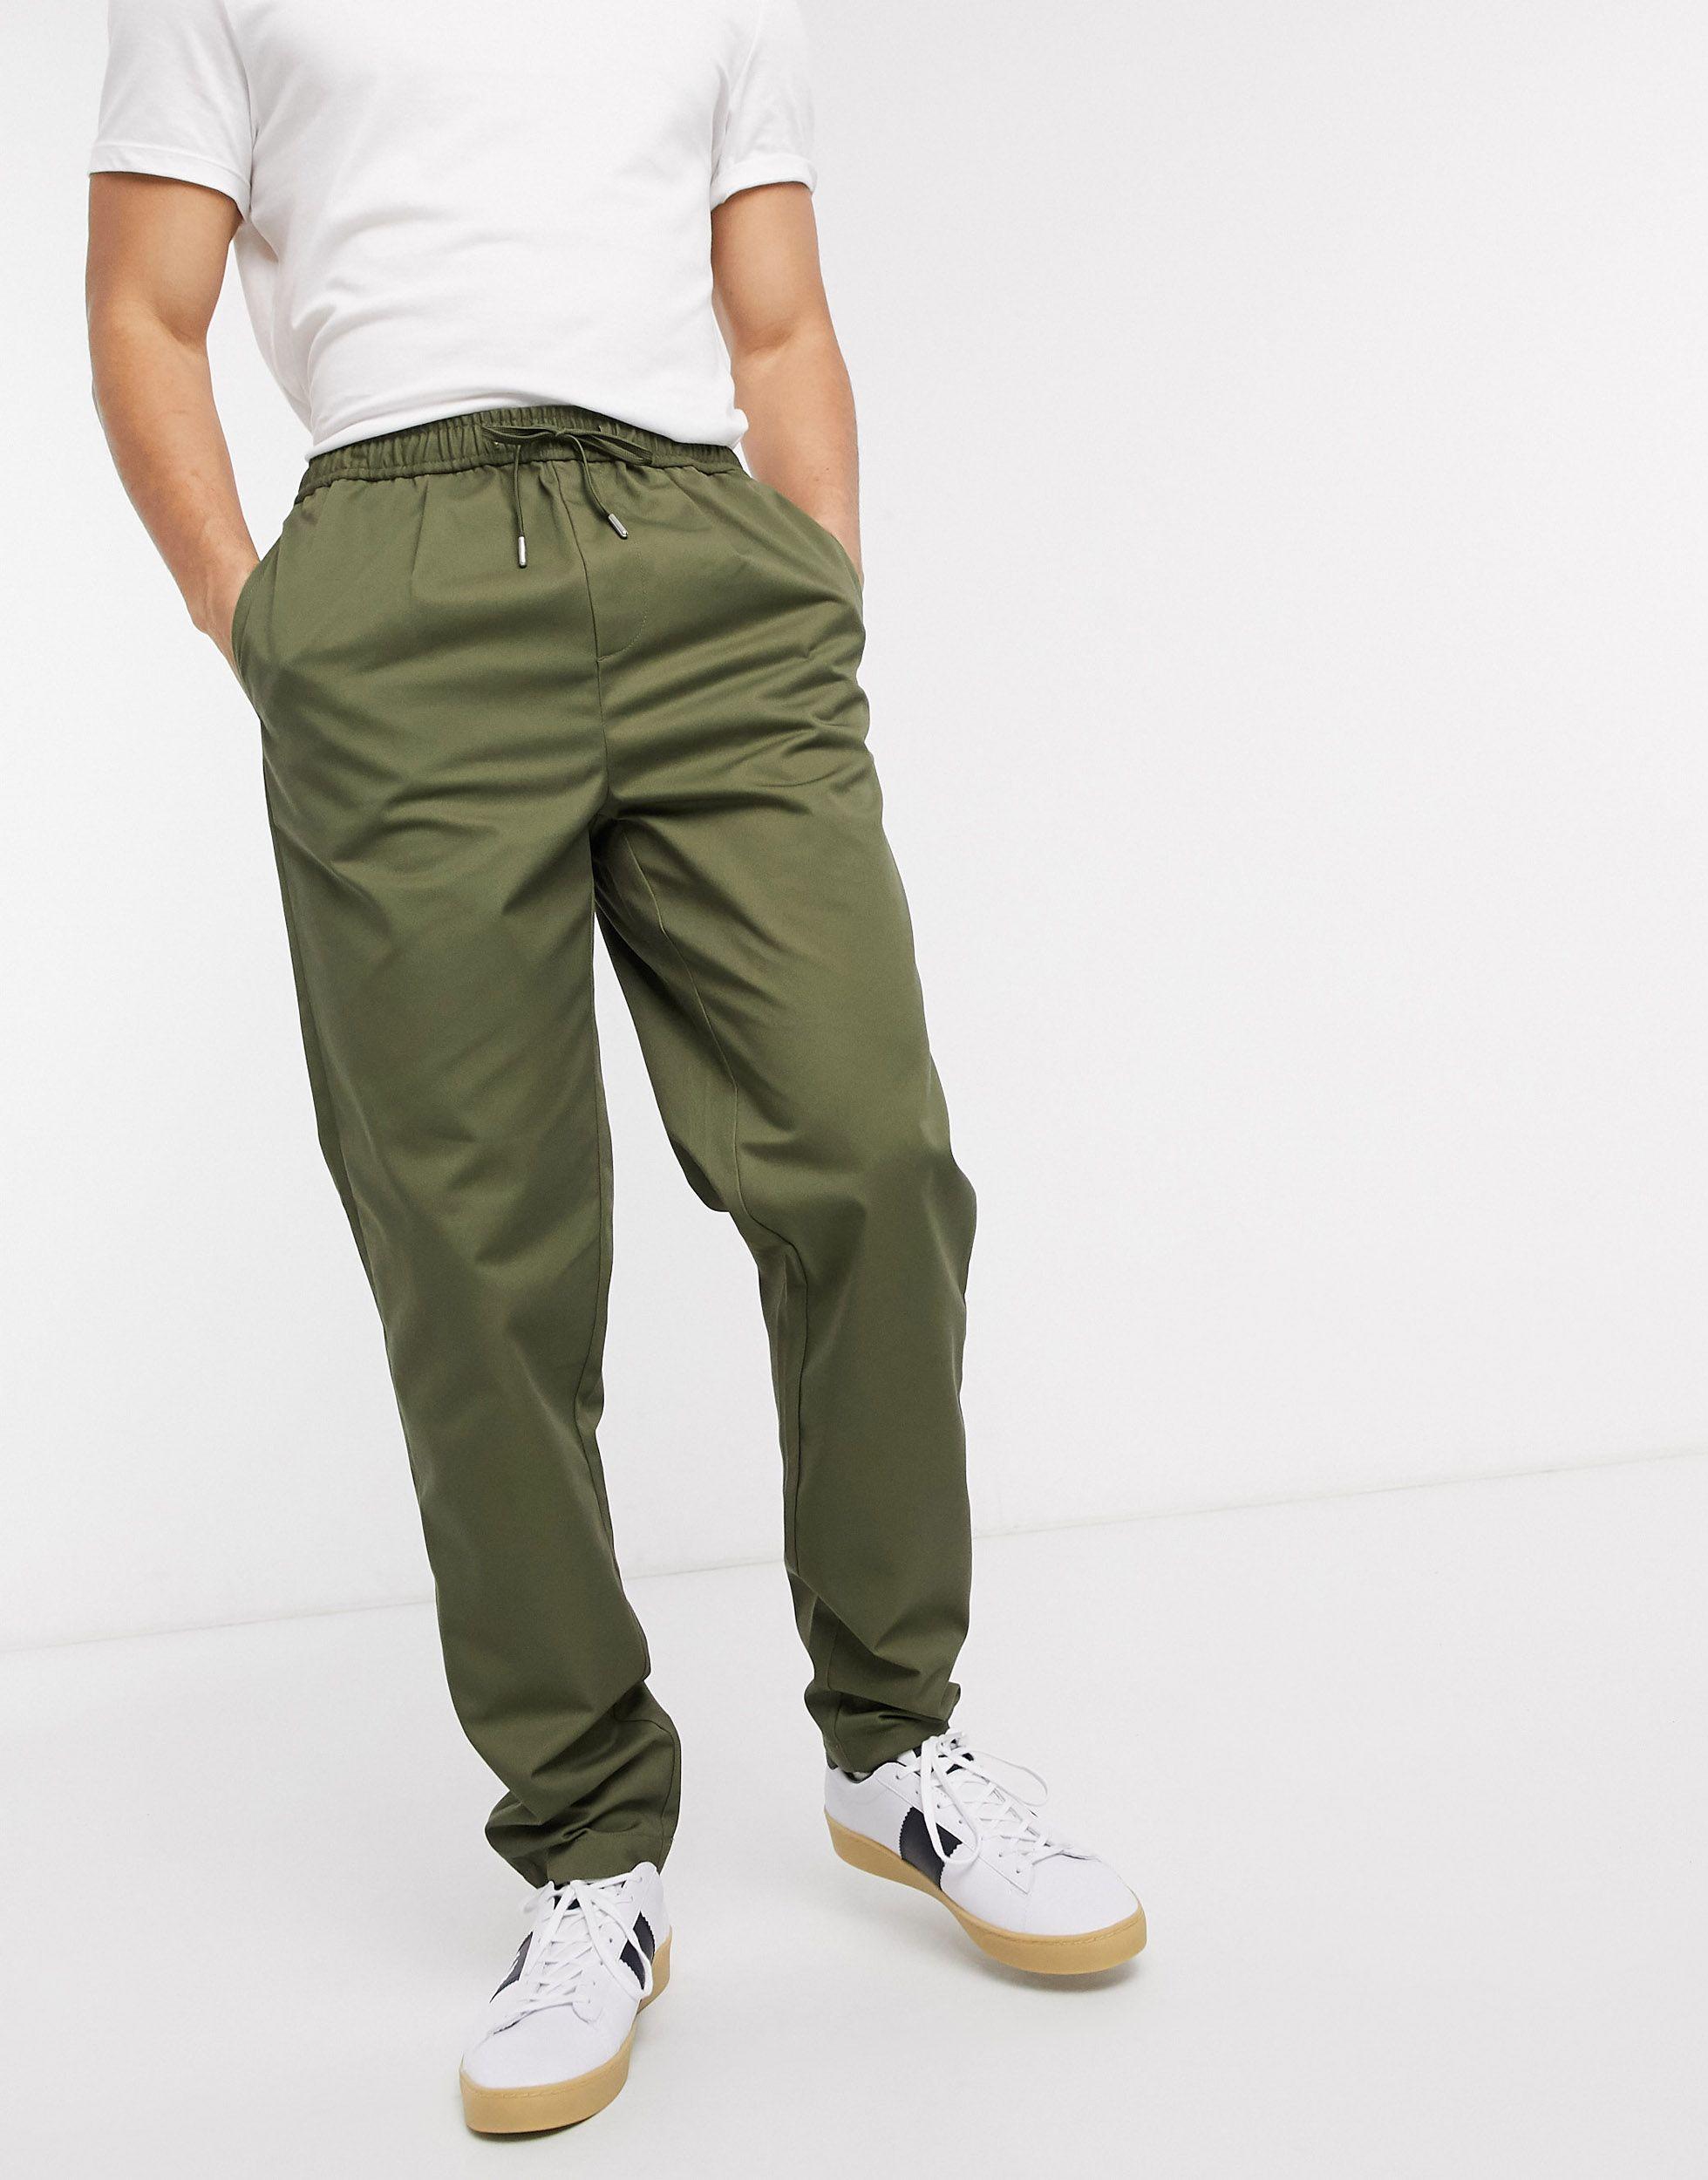 Fred Perry Synthetic Drawstring Twill Trousers in Green for Men - Lyst